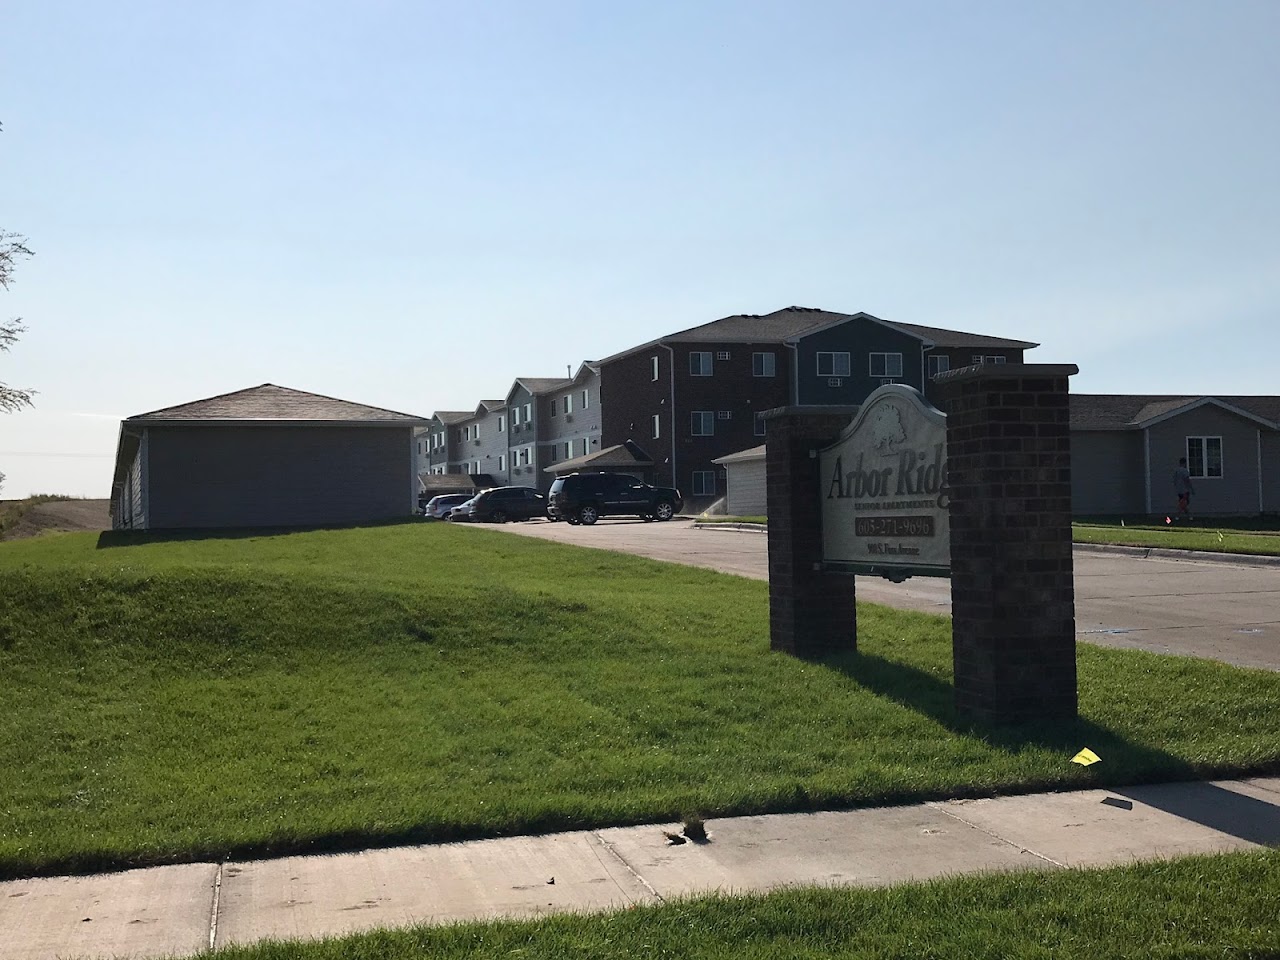 Photo of ARBOR RIDGE SENIOR APARTMENTS. Affordable housing located at 900 S FOSS AVENUE SIOUX FALLS, SD 57110